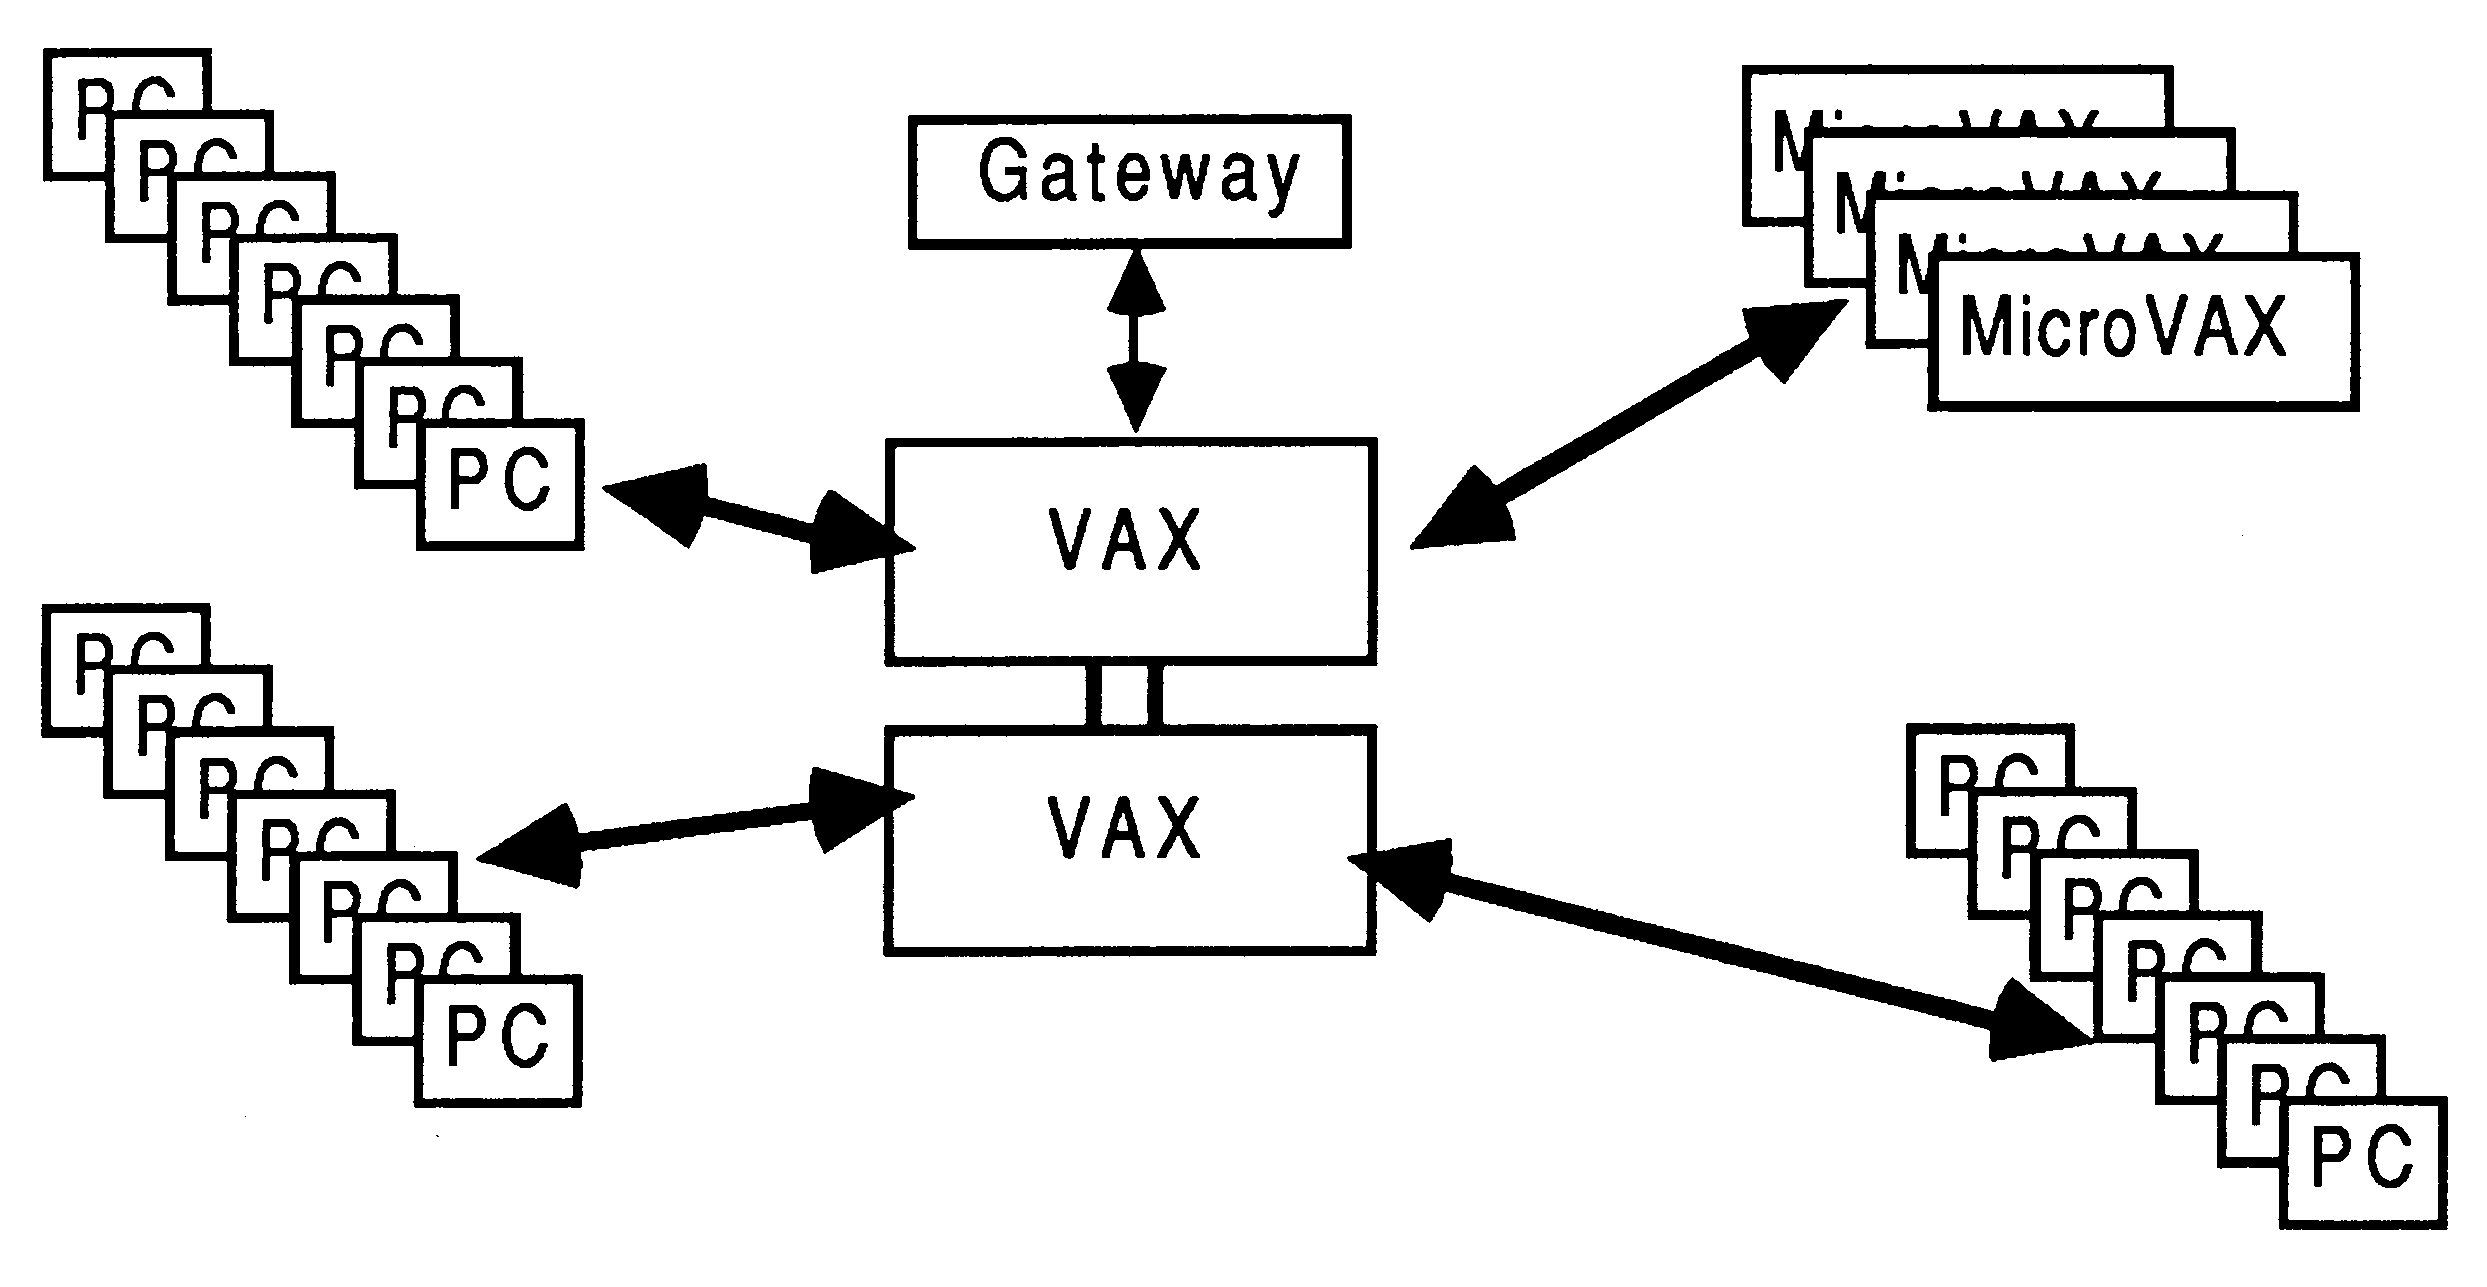 A typical computer network